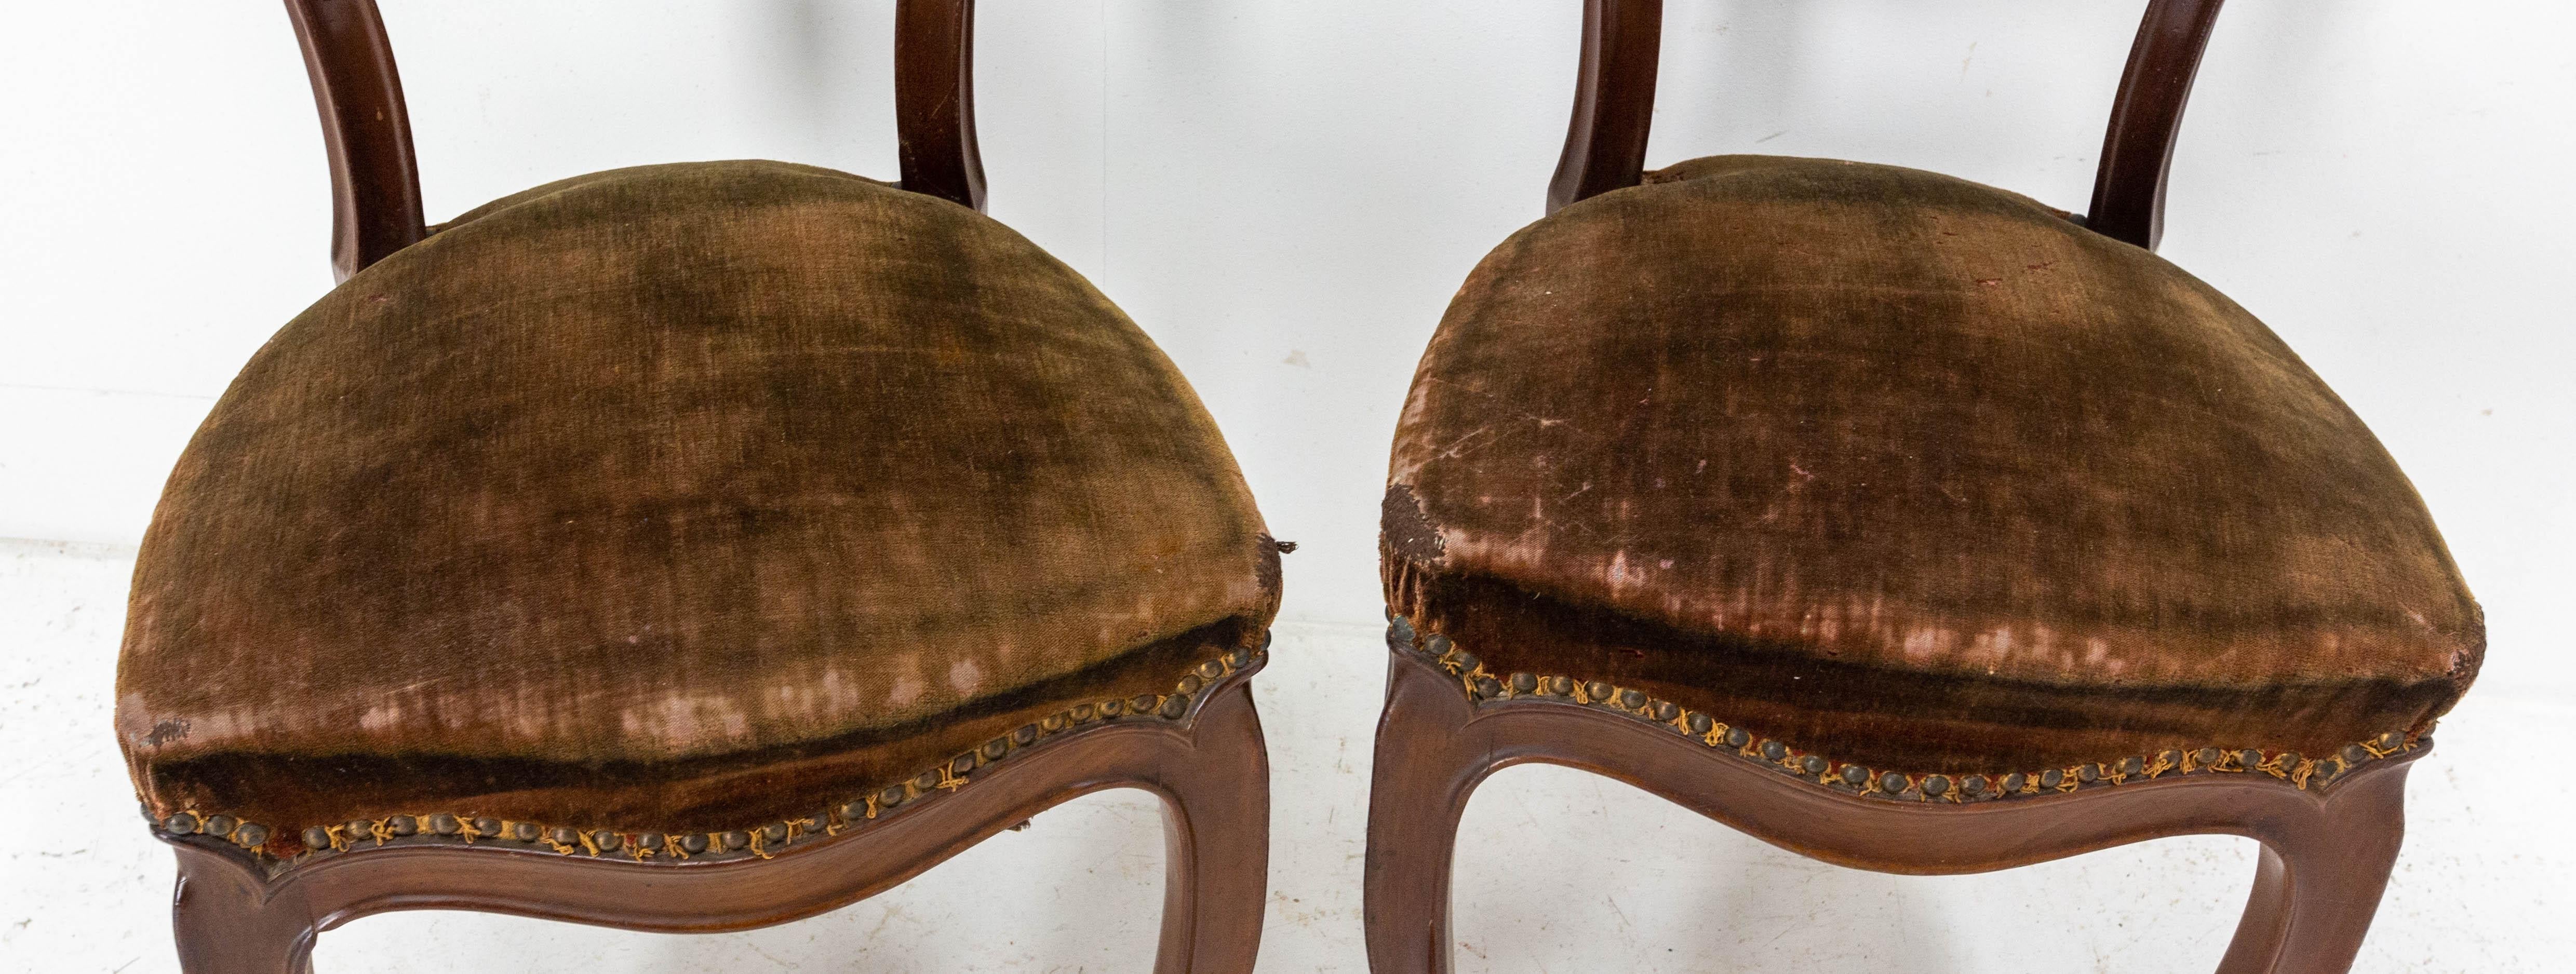 Pair of Napoleon III Exotic Wood and Velvet Chairs French, Late 19th Century For Sale 6